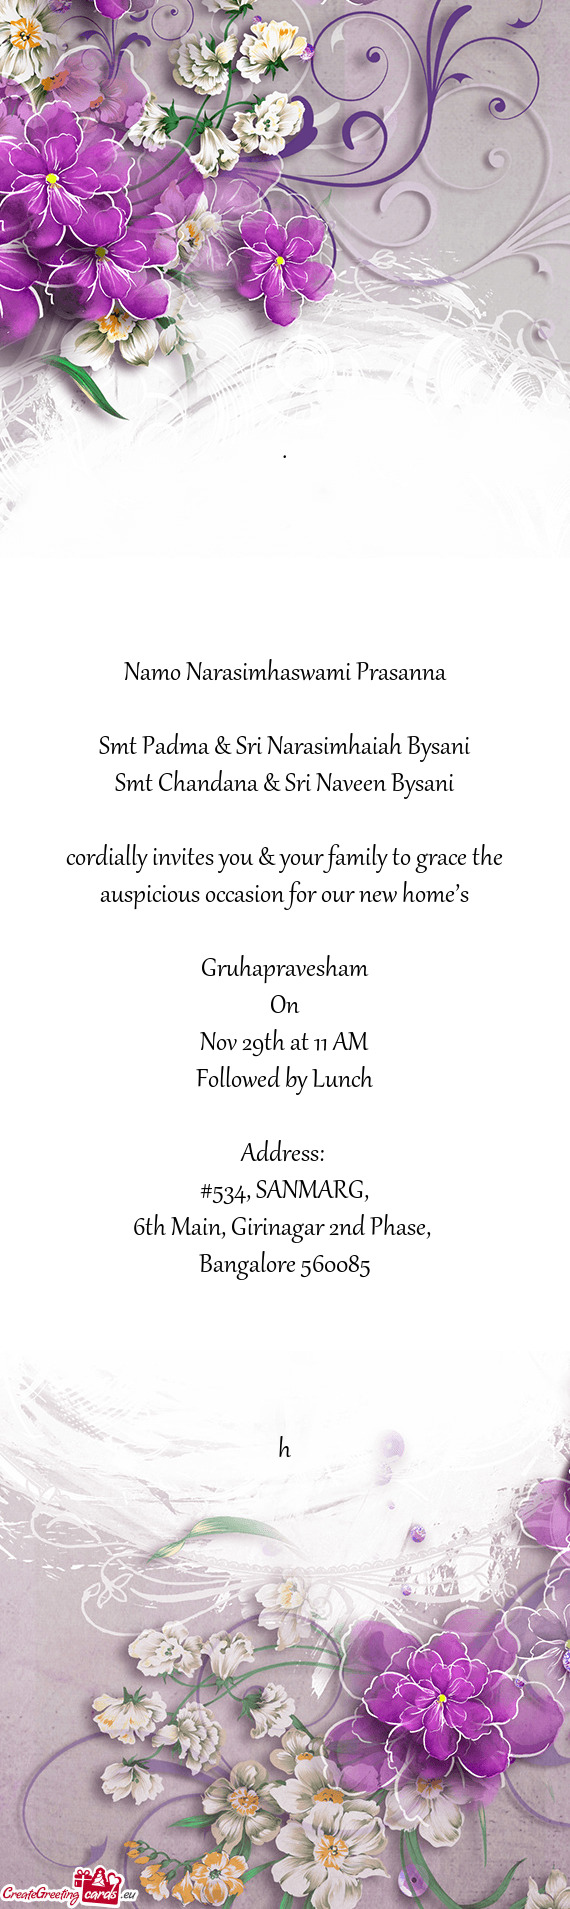 Cordially invites you & your family to grace the auspicious occasion for our new home’s